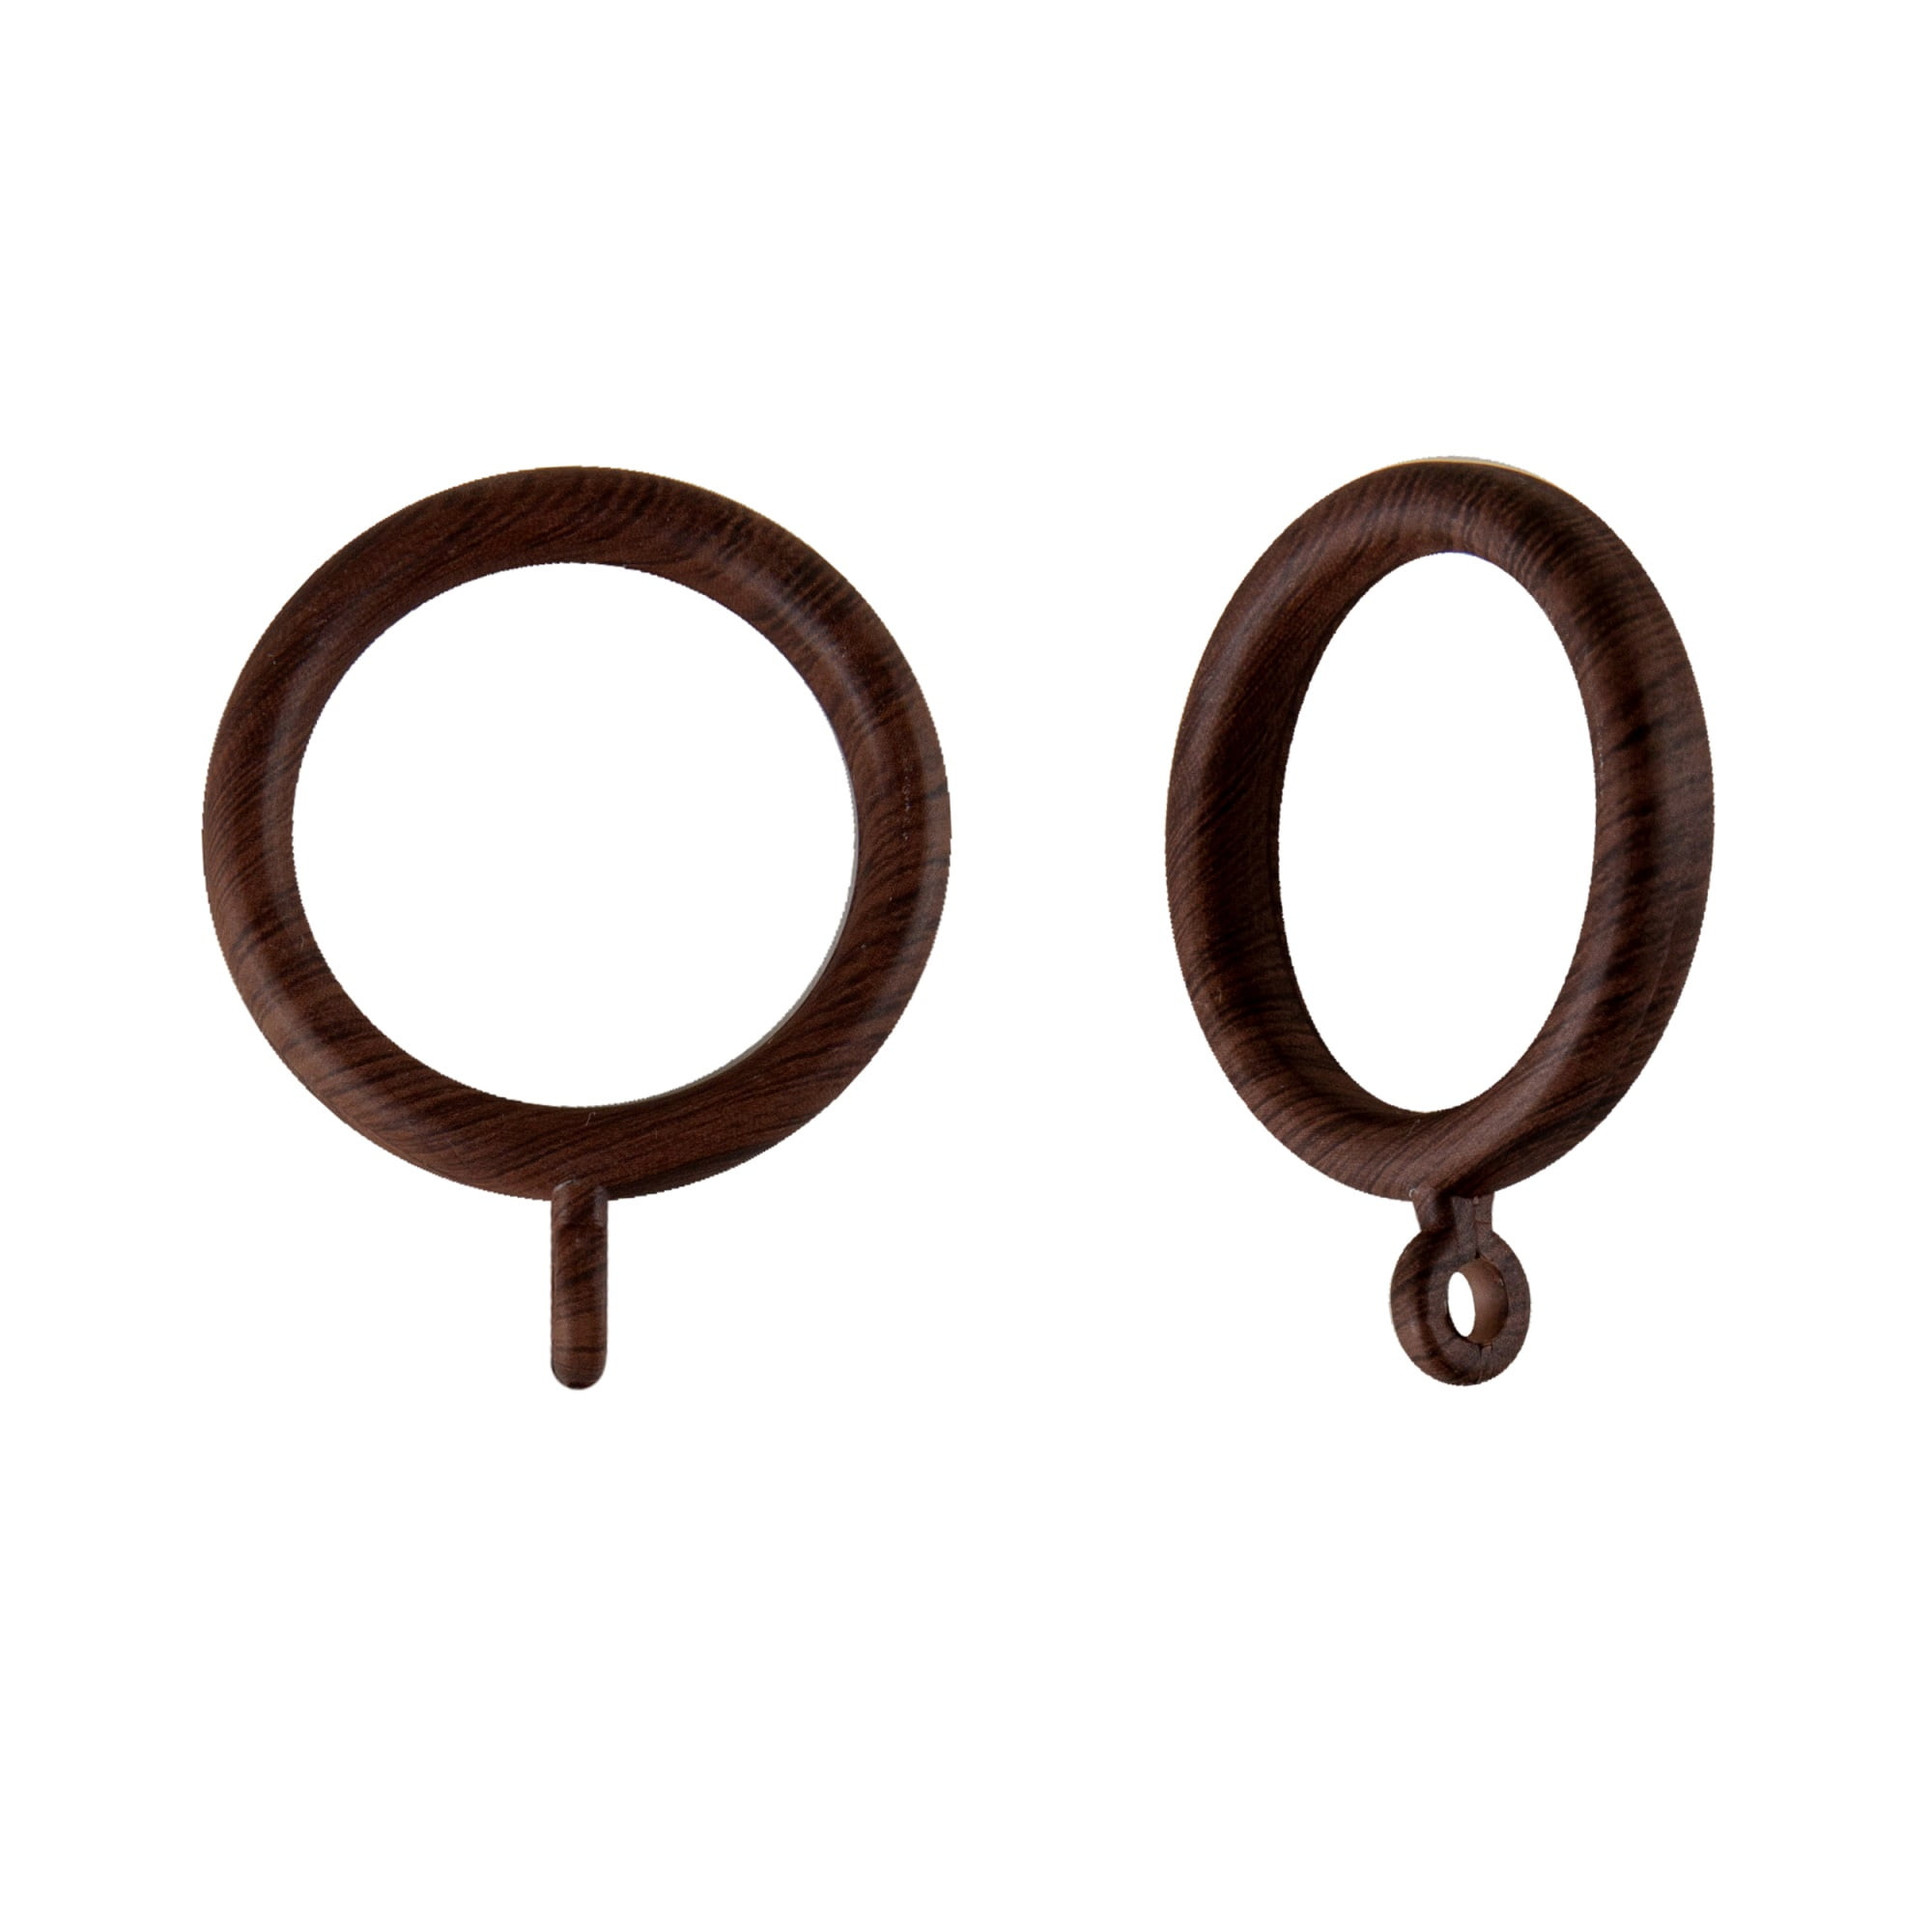 Wooden curtain rings Decorative Wood Ring with Detachable Clip Brown Walnut 20 